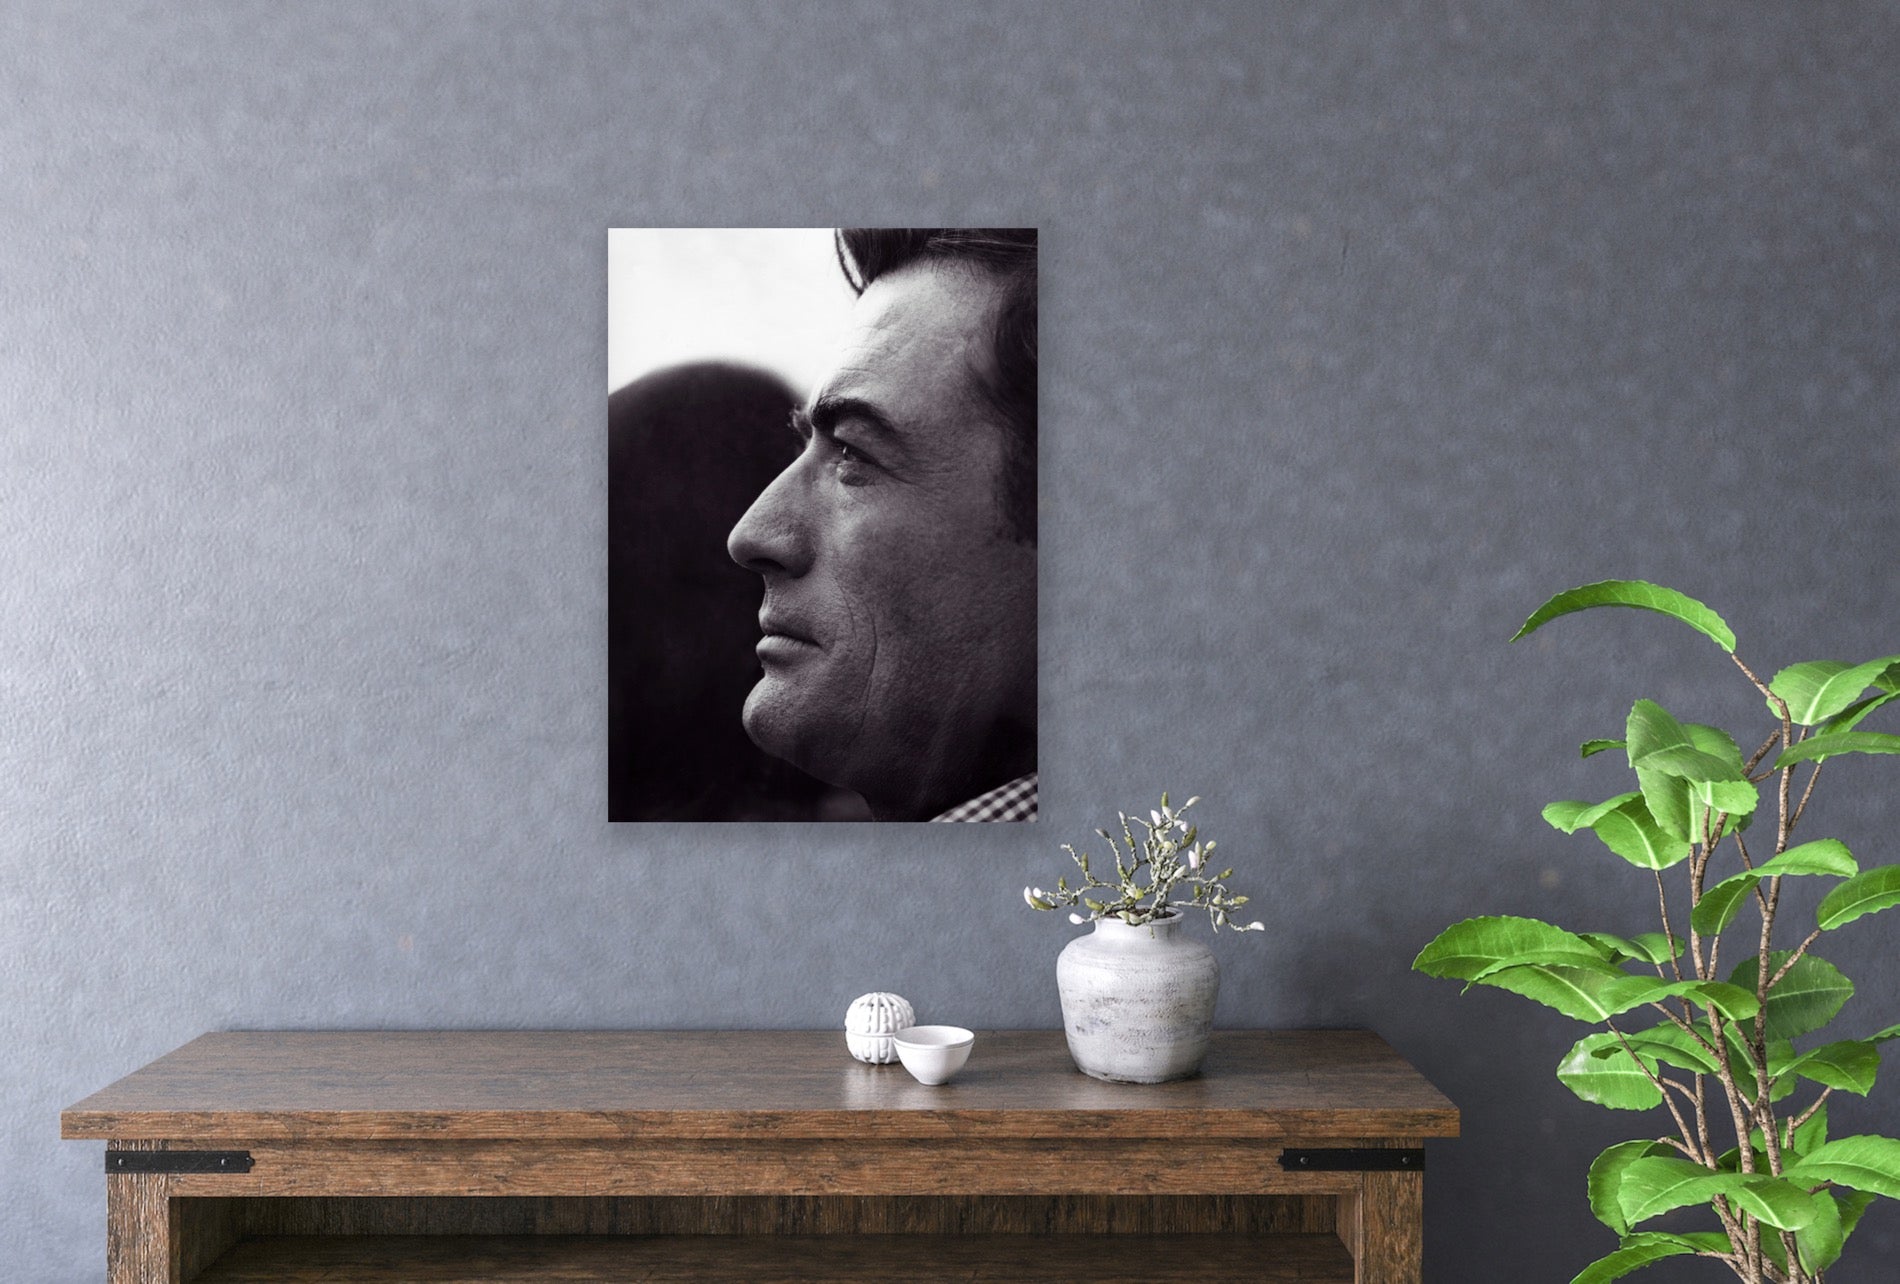 The Character Portrait | Gregory Peck [0672]